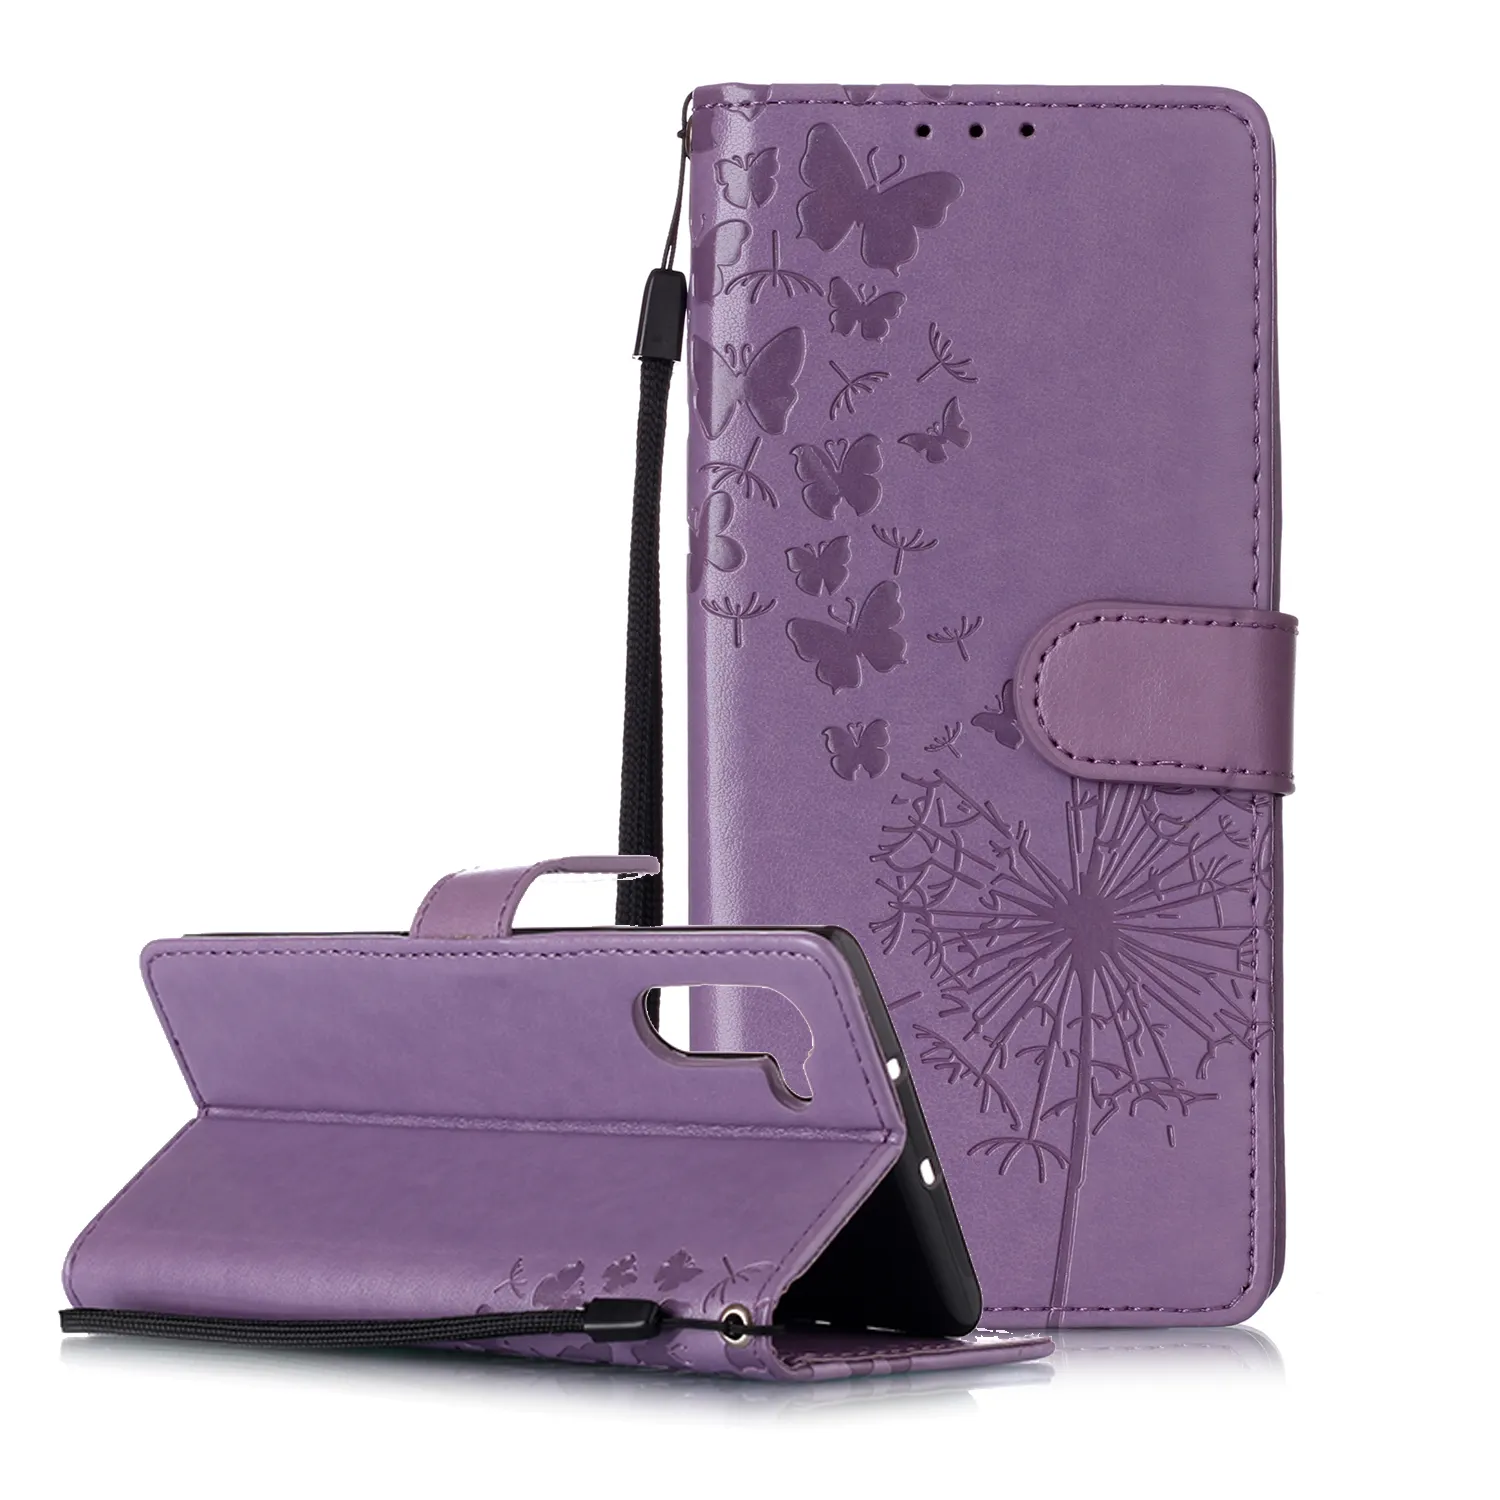 Flip Leather Case For Samsung Galaxy Note10 Note 10 Pro Butterfly Flower Tpu+Leather Wallet Card Holder Cover Coque